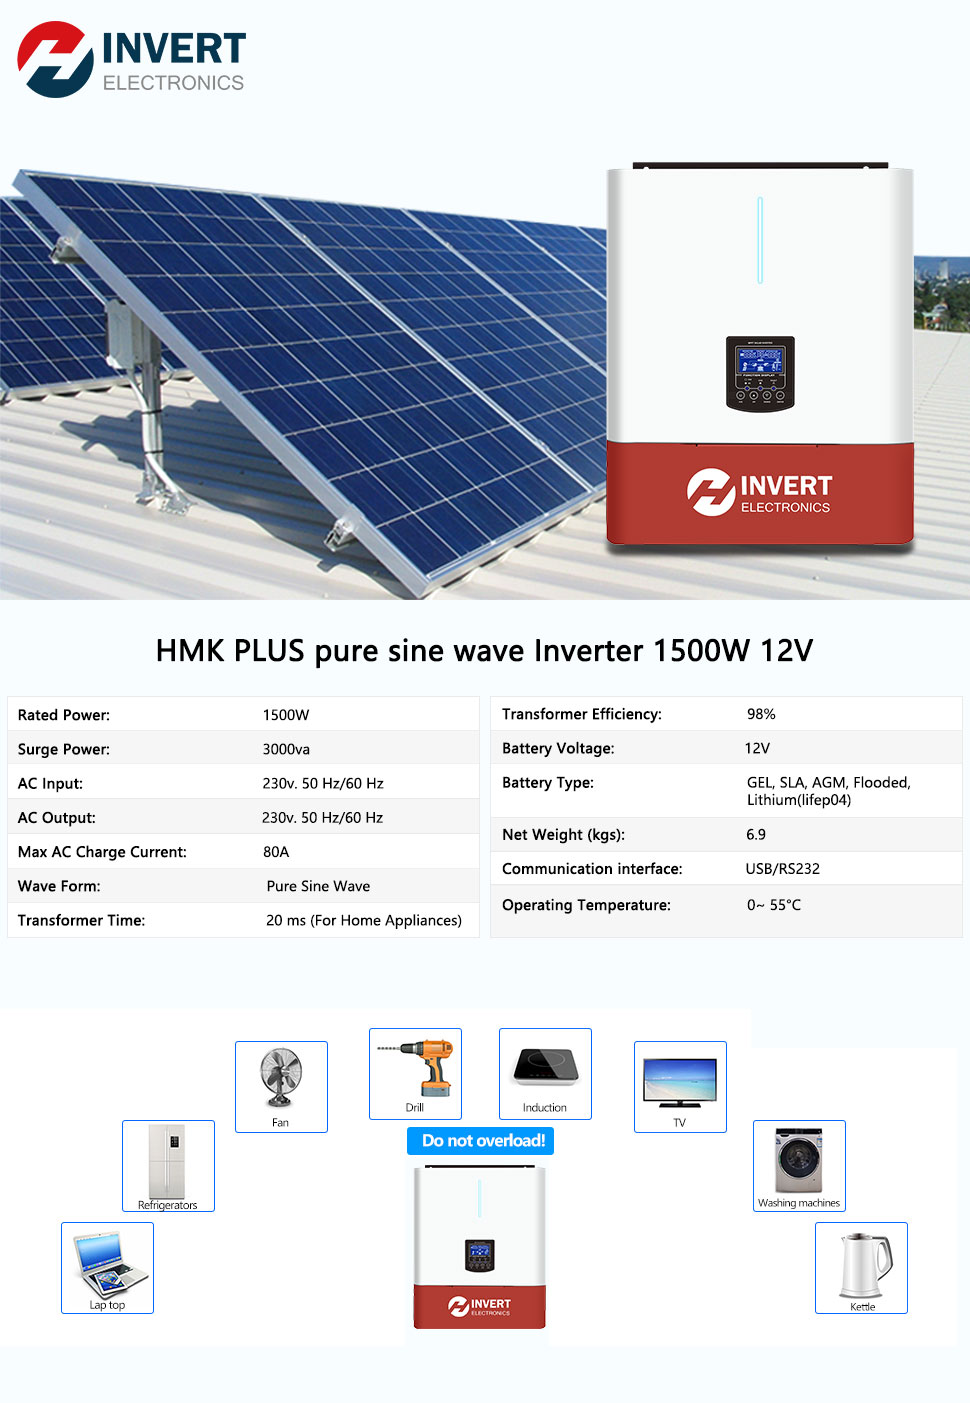 Wall-mounted Safe Off Grid Solar Inverter for Commercial